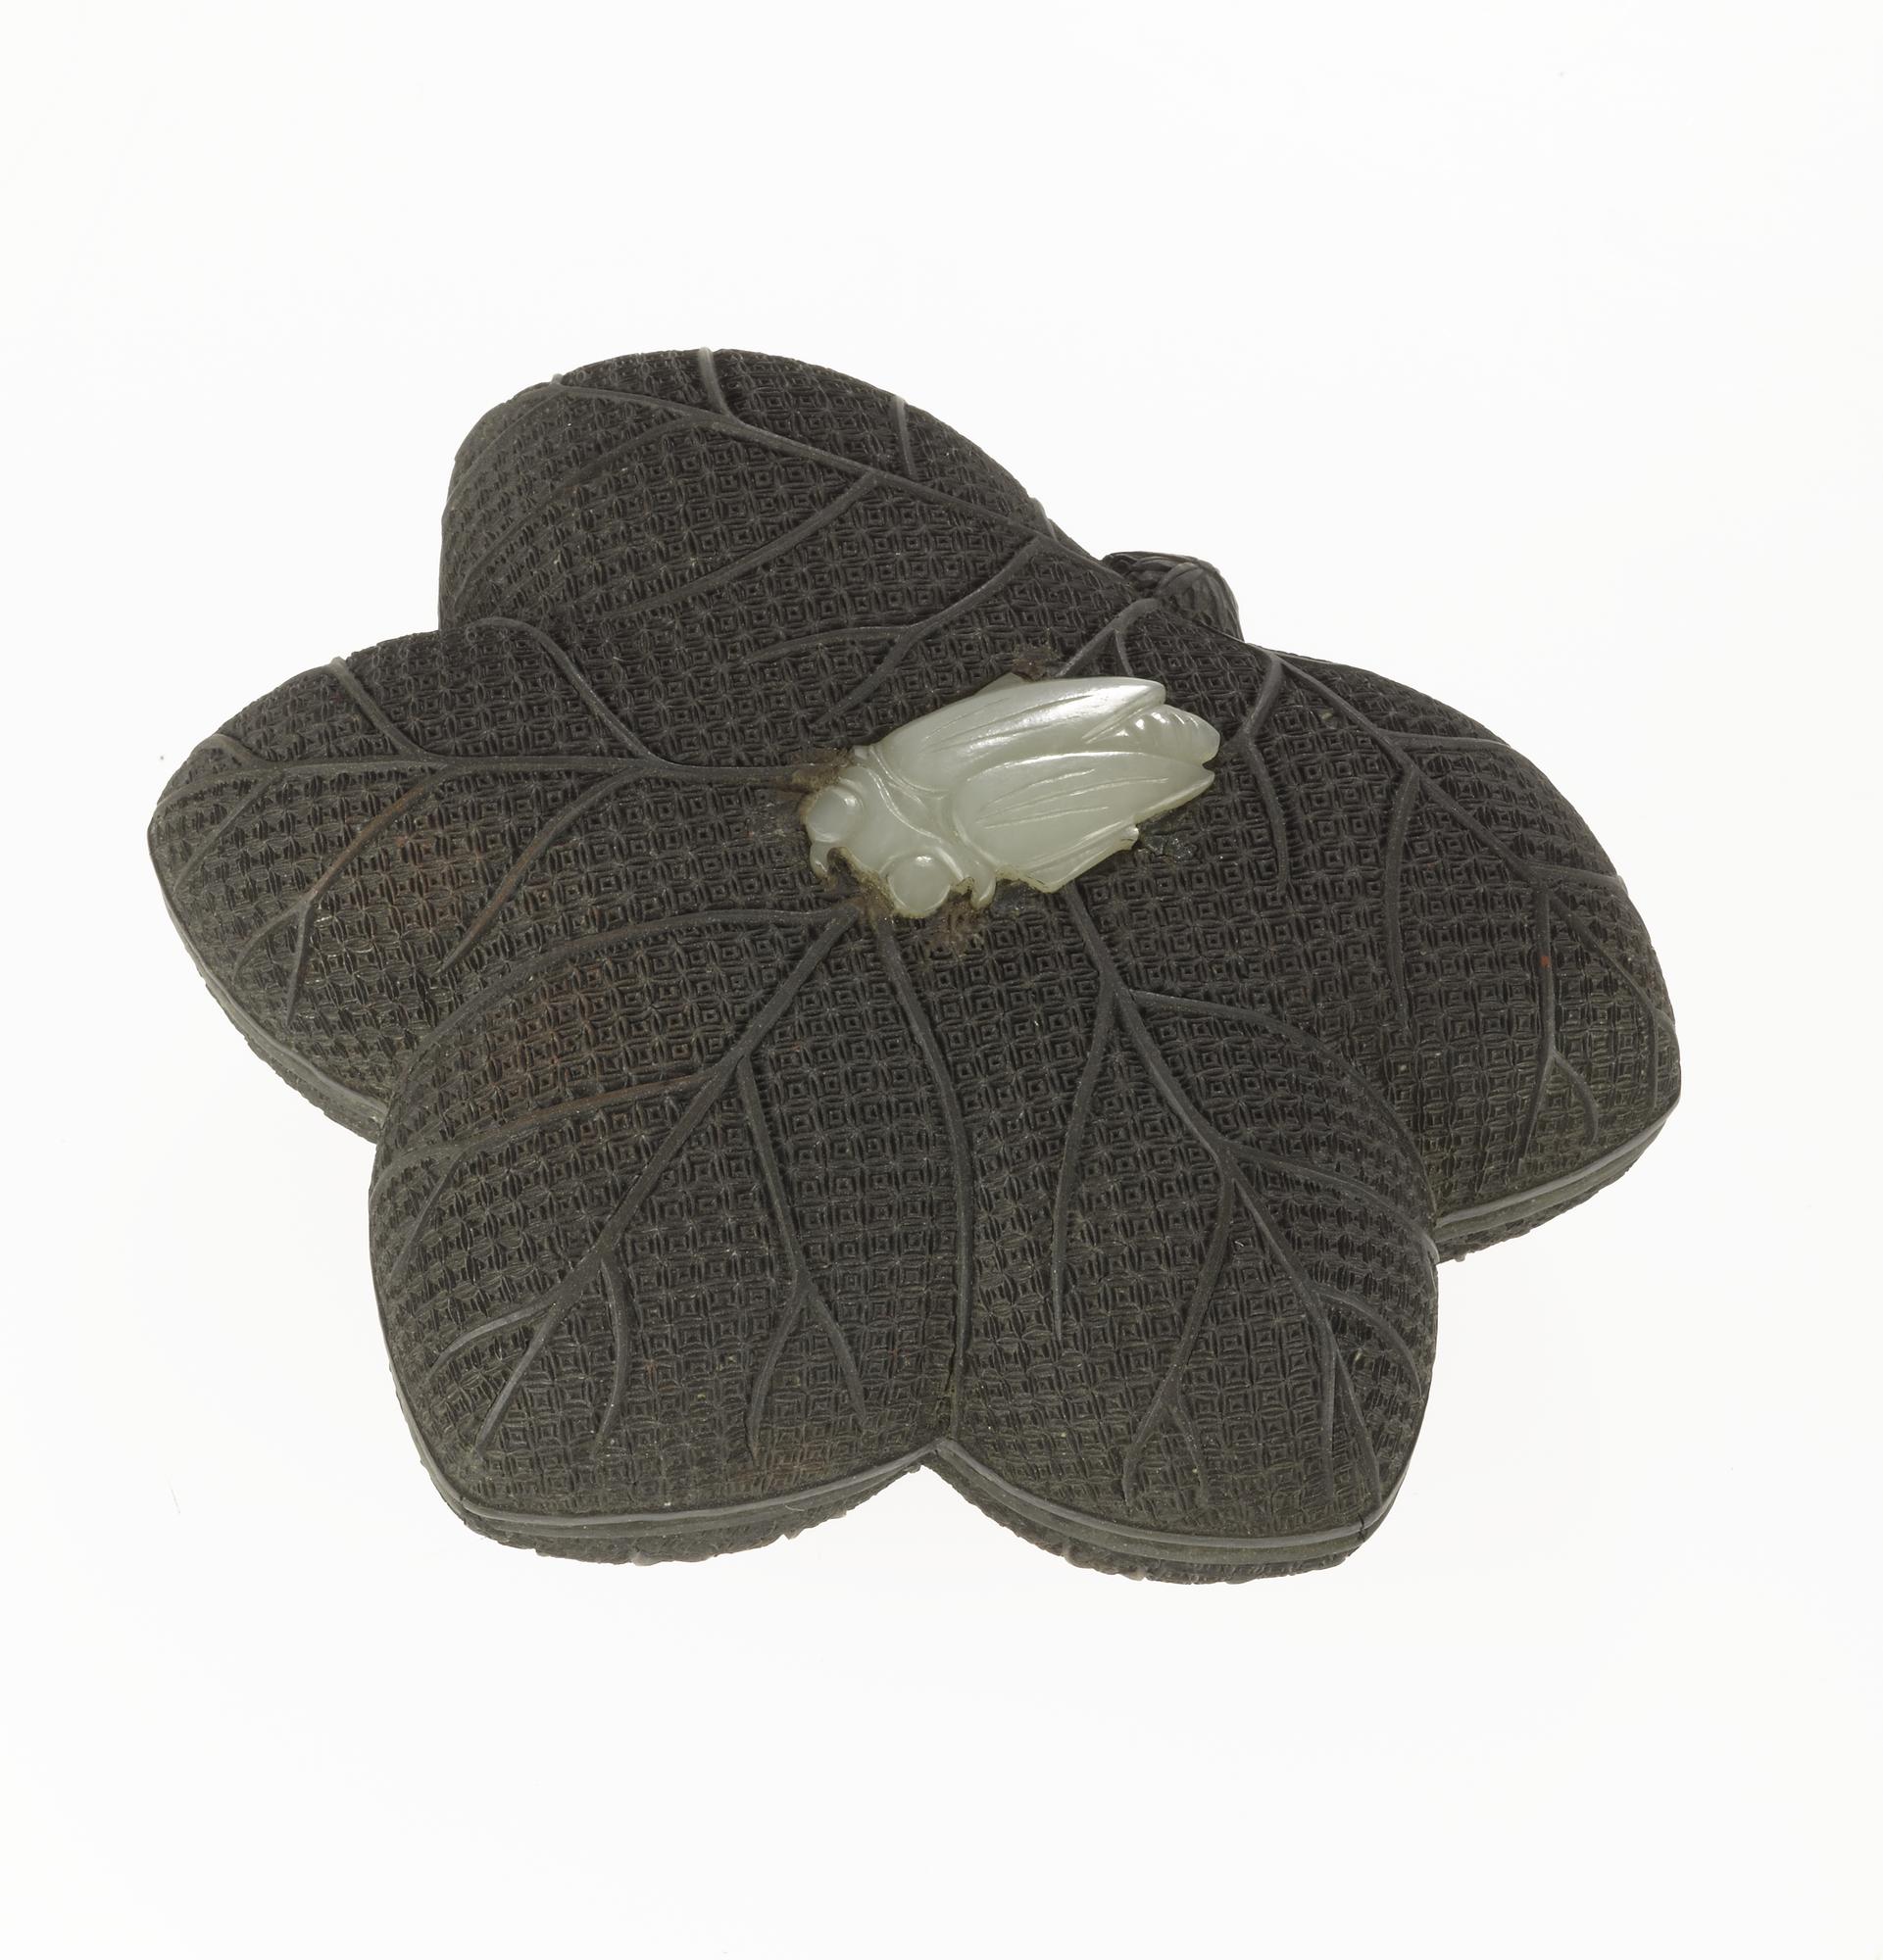 Box and cover of olive green lacquer, pentafoliate maple leaf form, with a white jade cicada on the cover, and a black lacquer interior painted with flower and fruit sprays: China, Qing dynasty, Qianlong reign, 1736 - 1795 (A.1930.500).